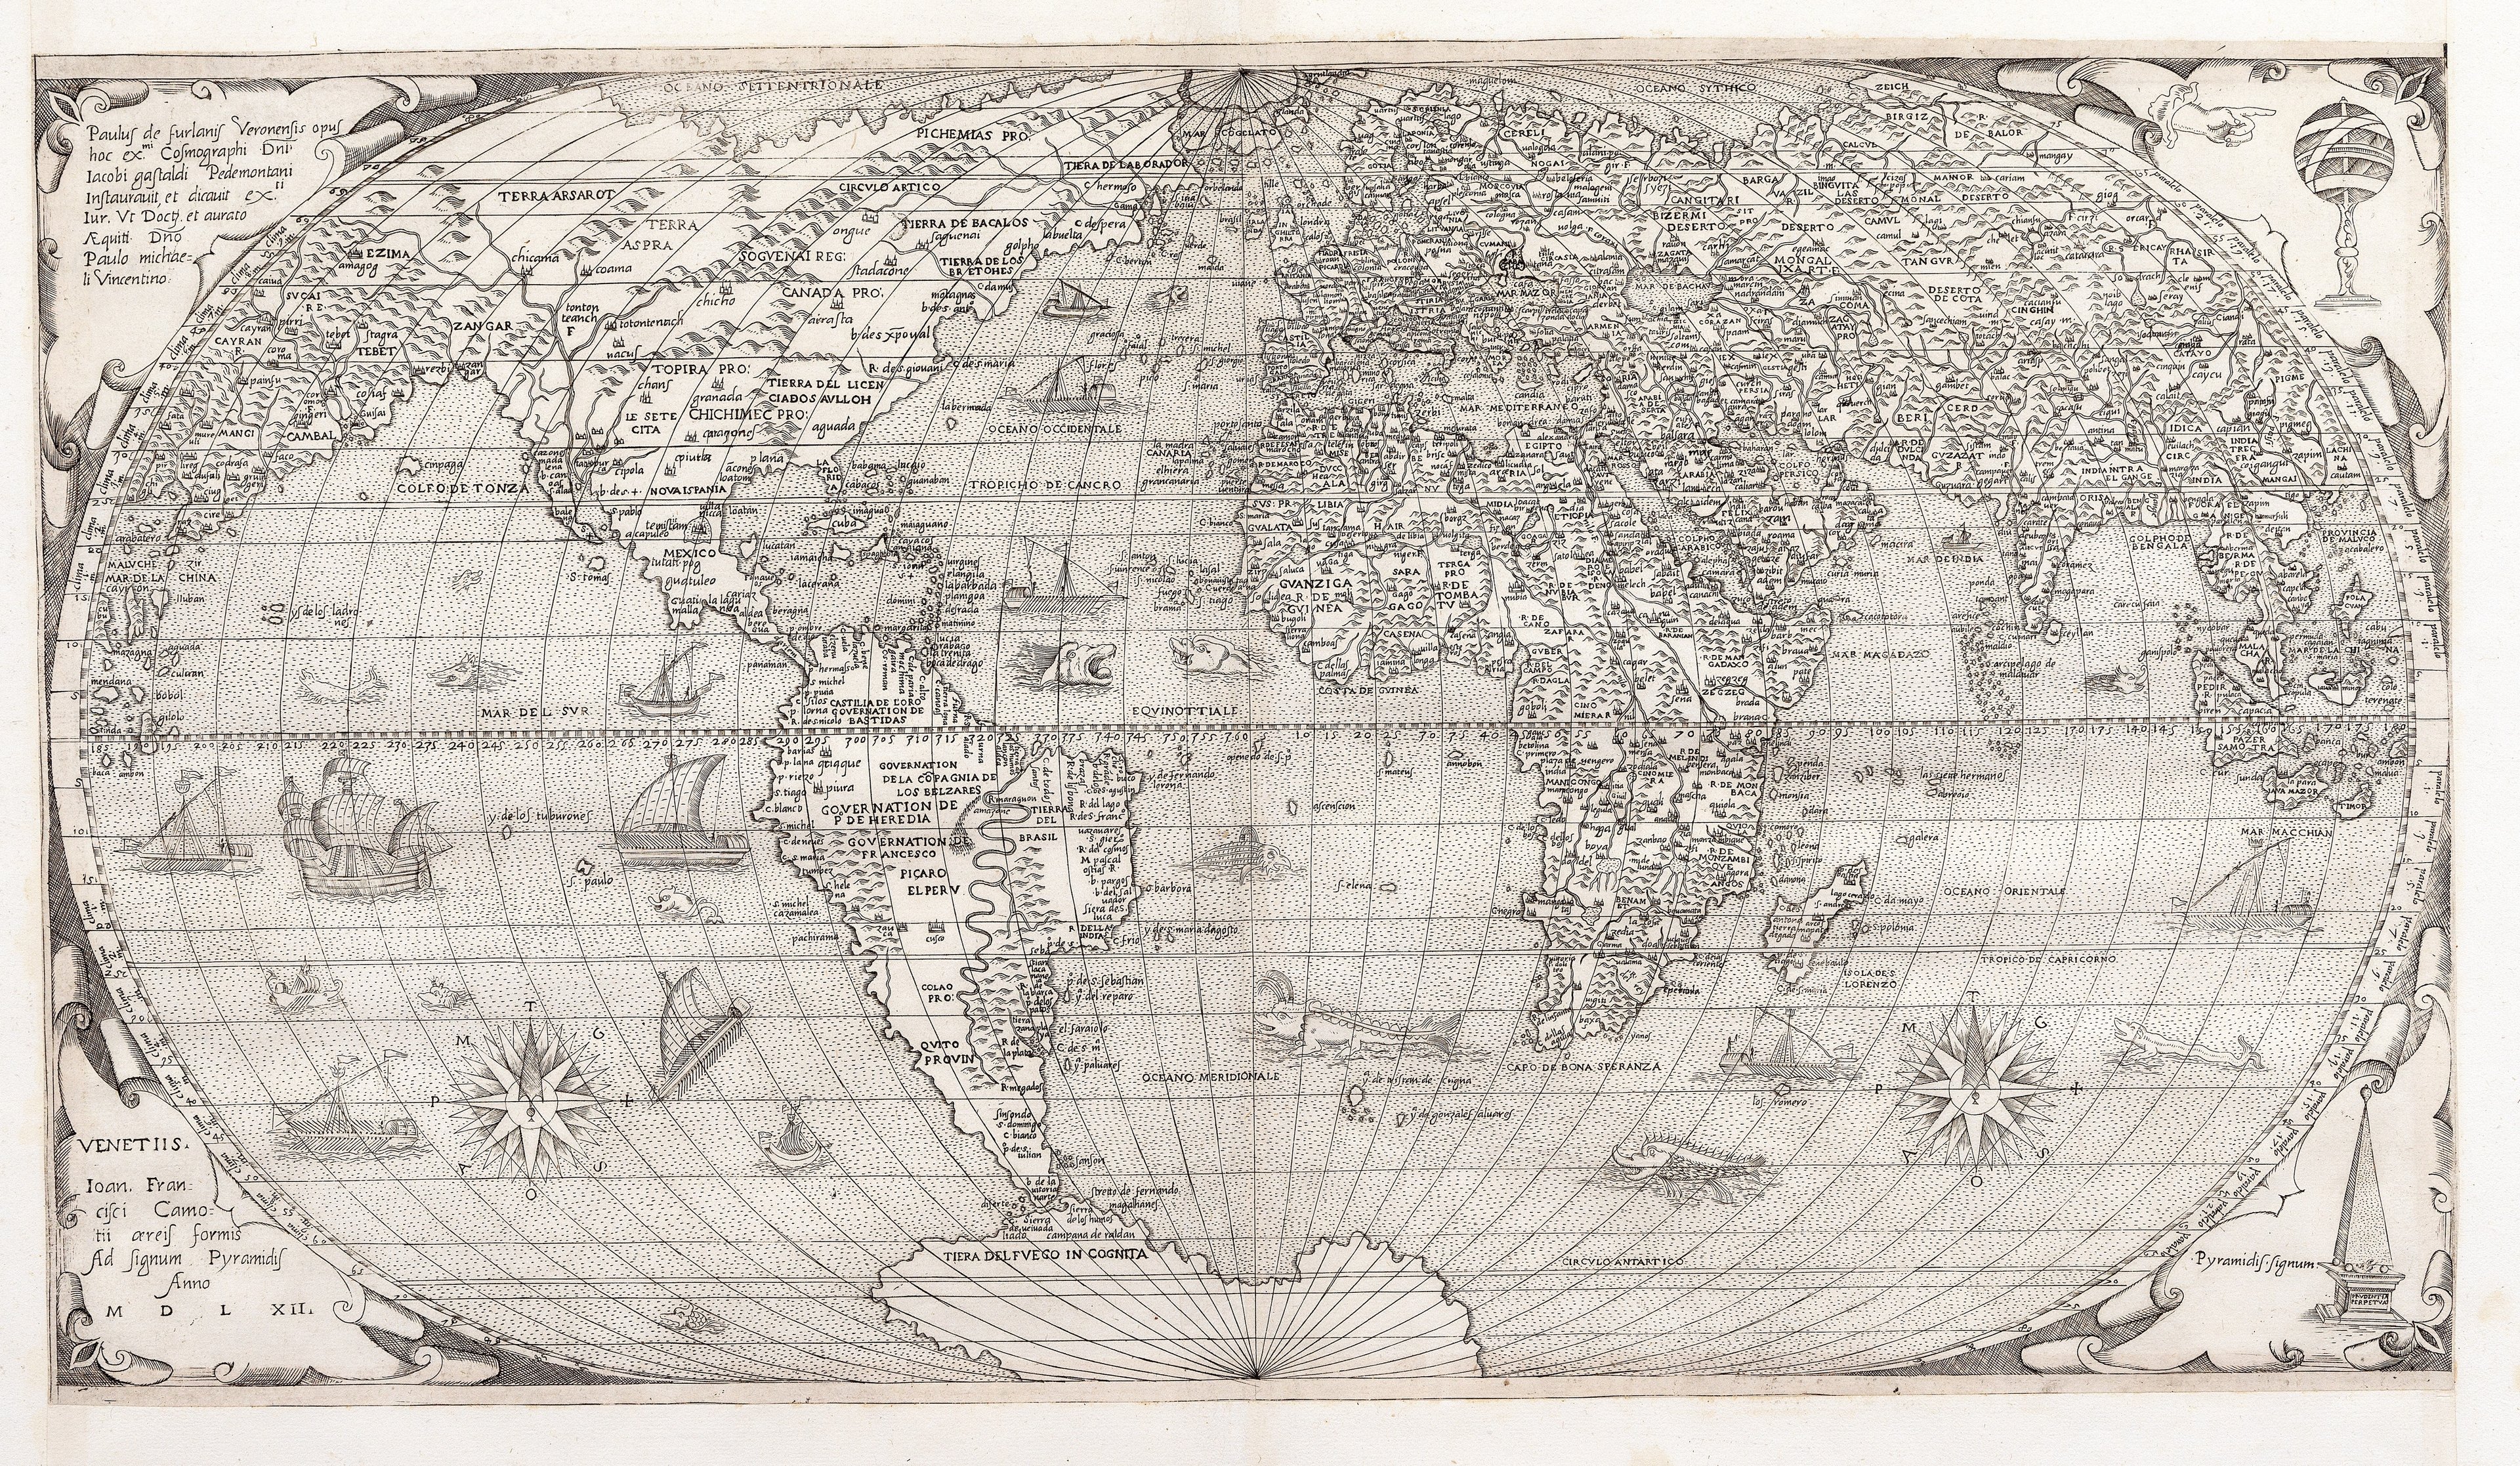 Paolo Forlani’s first world map with cartouche in the corners and beautifully engraved sea monsters and boats.